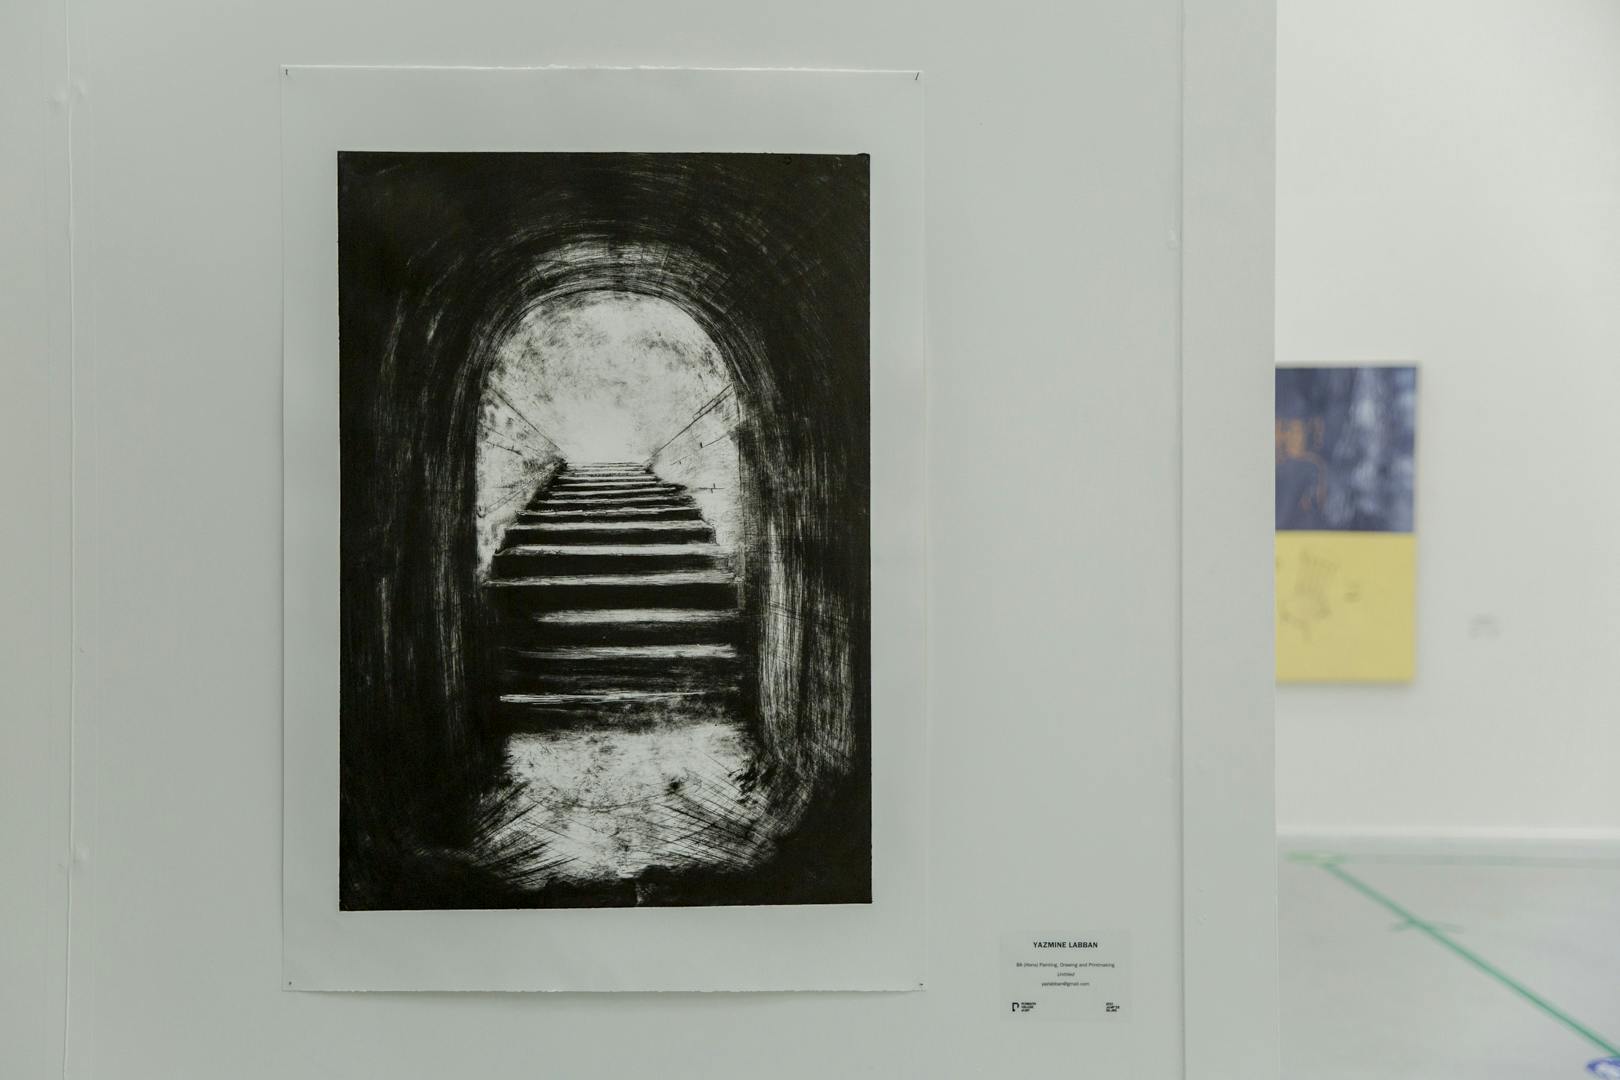 Image shows Yazmine's image of a black and white/grey scale tunnel or archway with some stairs behind it. In the background you can see another student's work in exhibition.